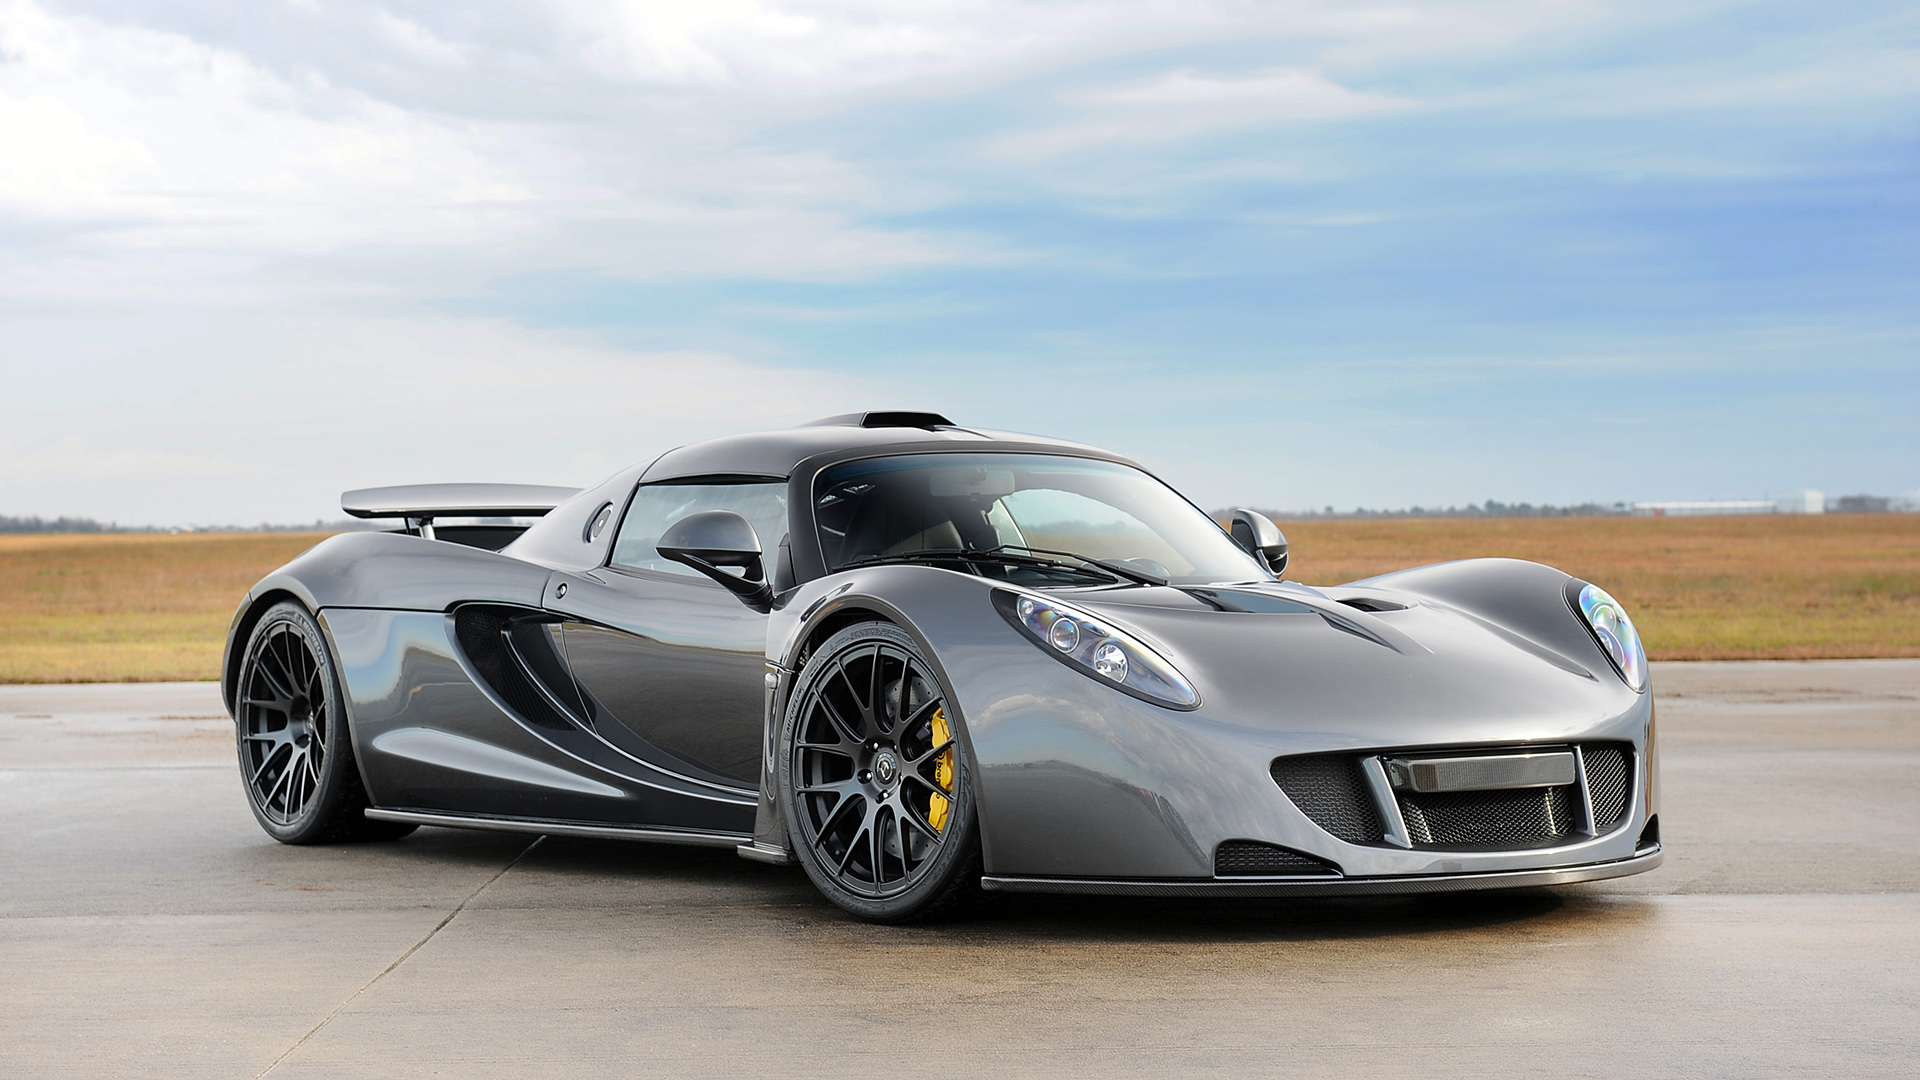 bikes and cars cars hennessey venom gt hd wallpaper Car Pictures